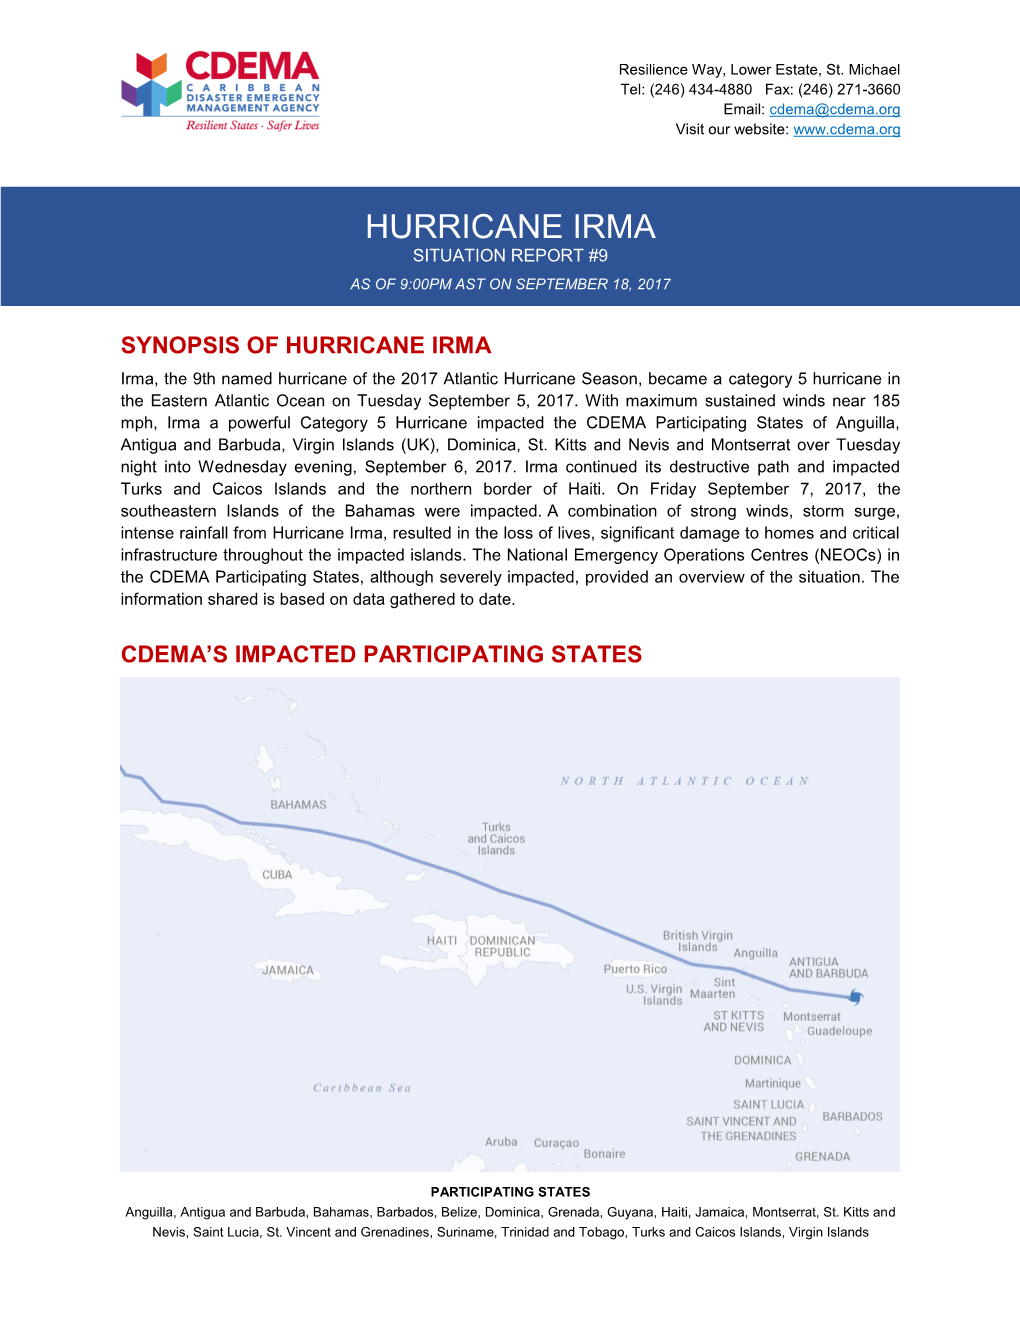 Hurricane Irma Situation Report #9 As of 9:00Pm Ast on September 18, 2017